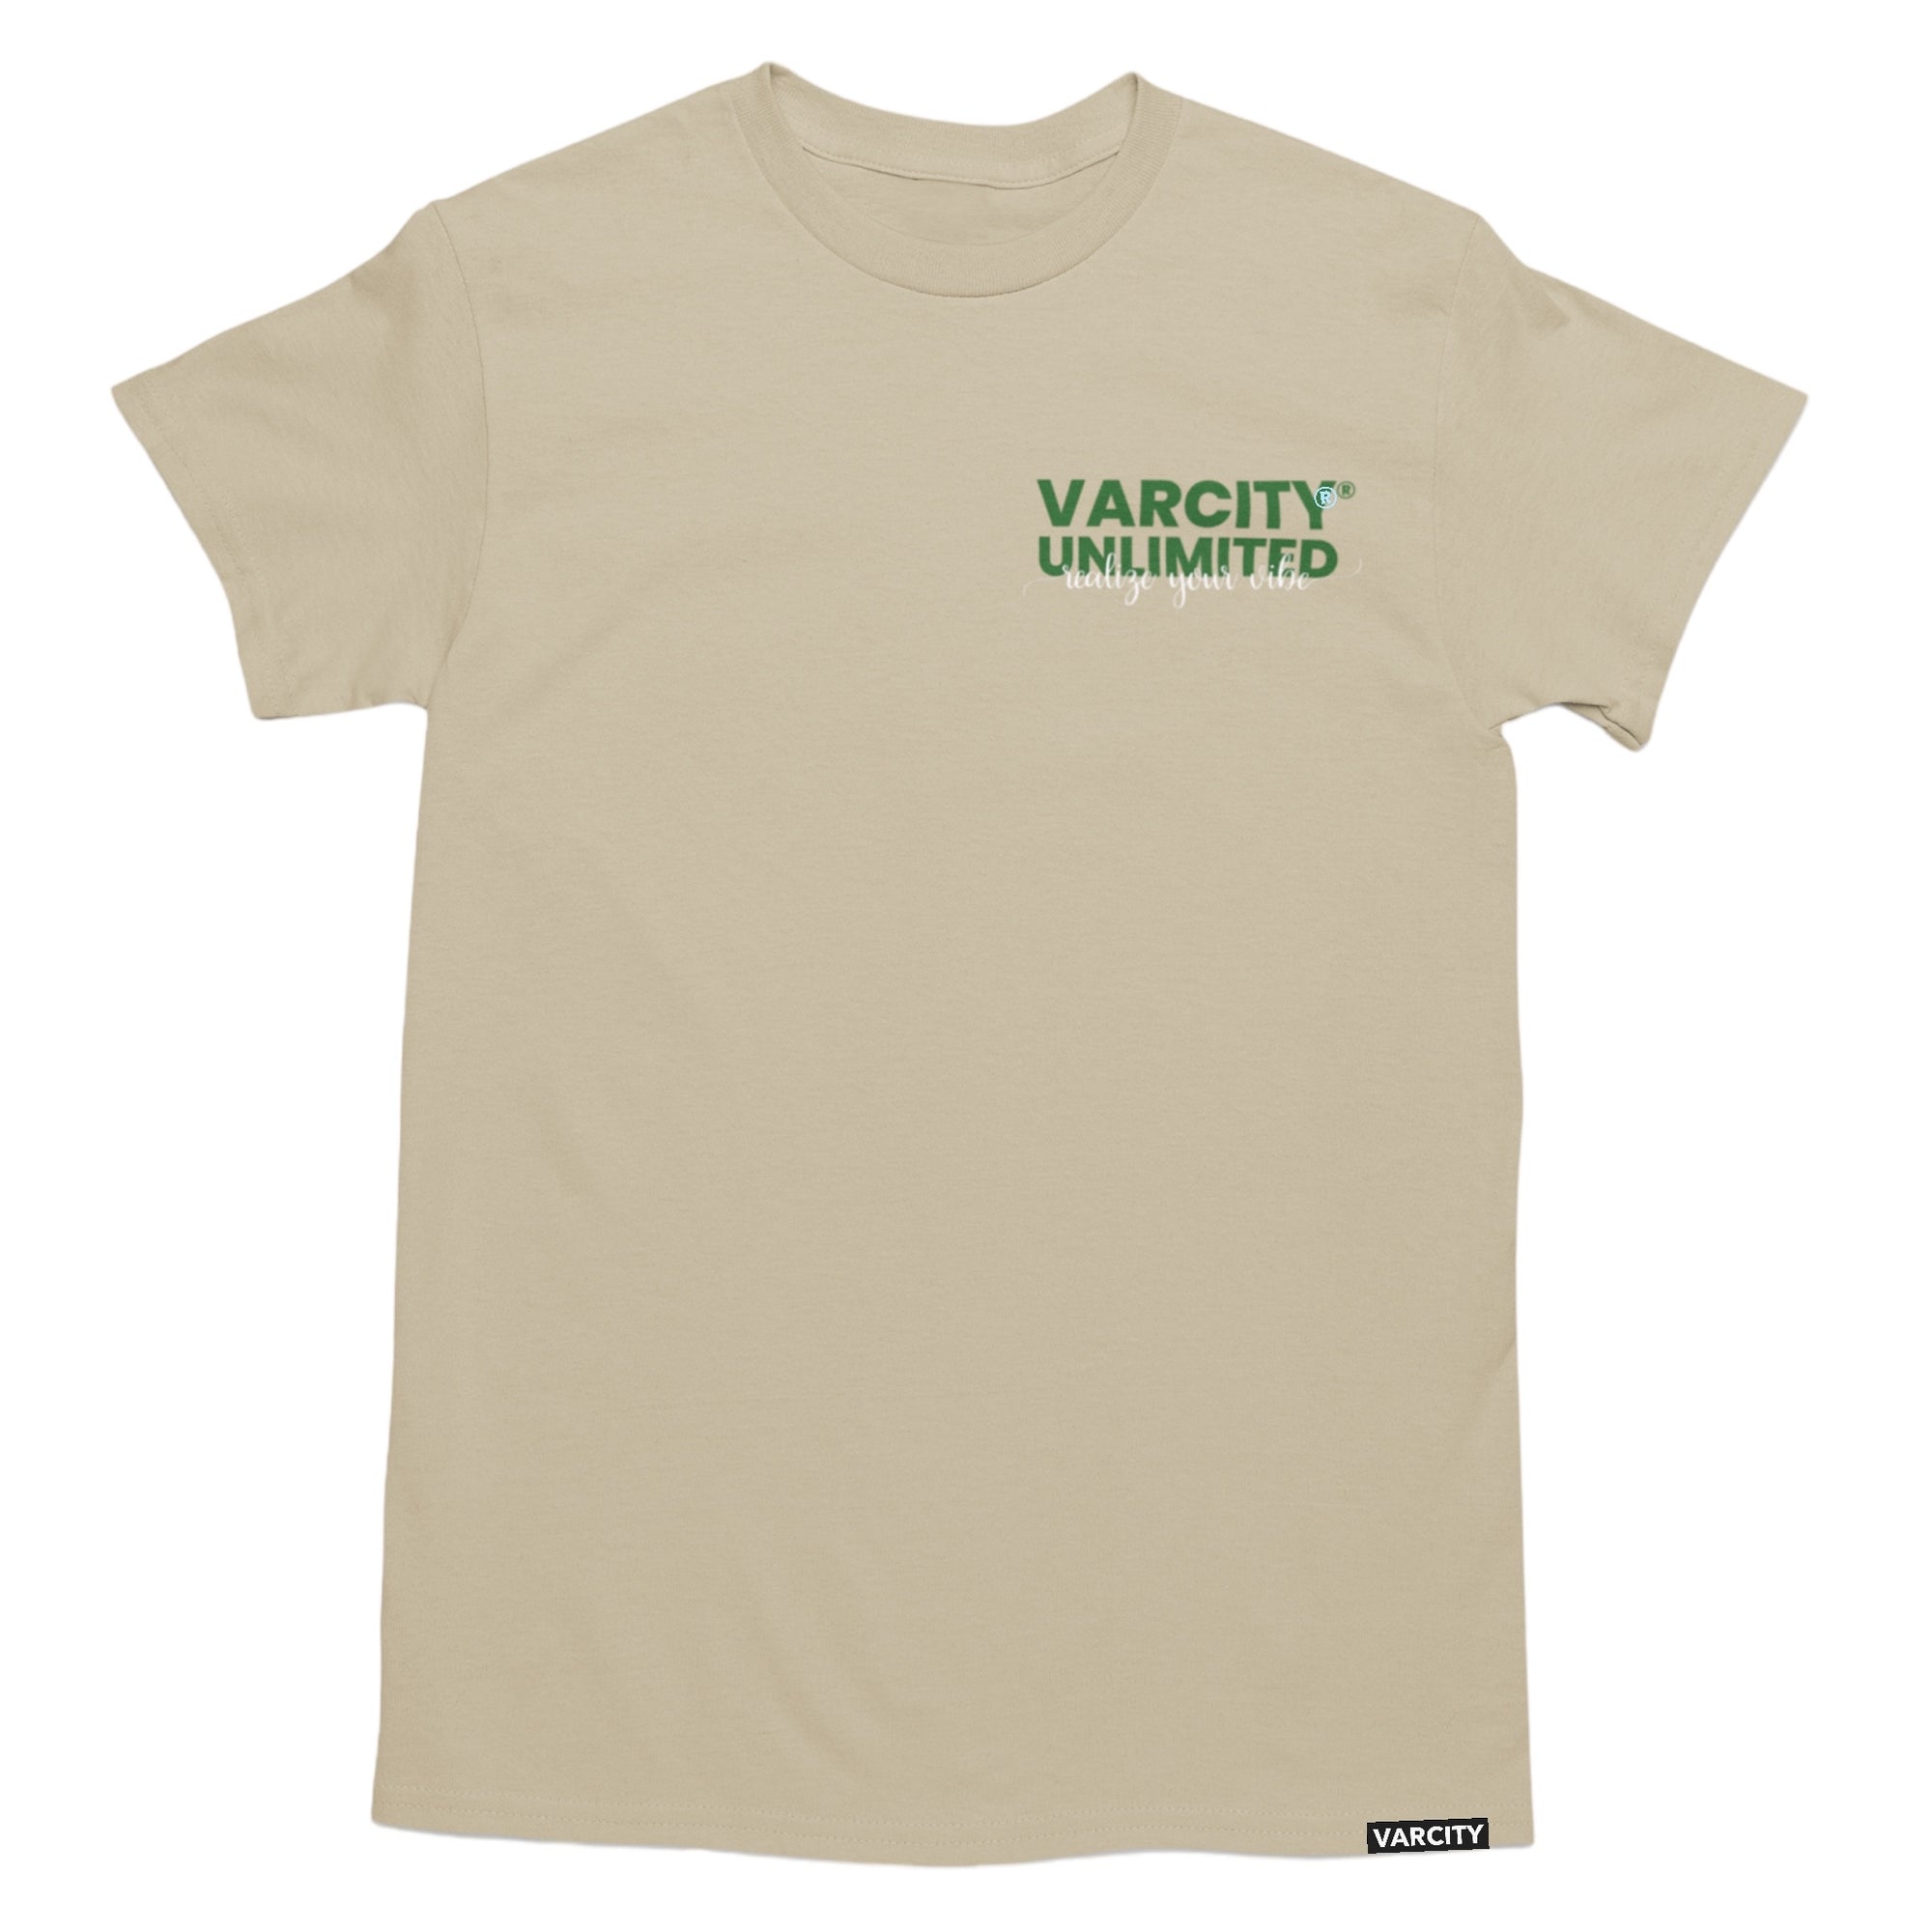 Varcity ® Unlimited Realize Your Vibe T Shirt